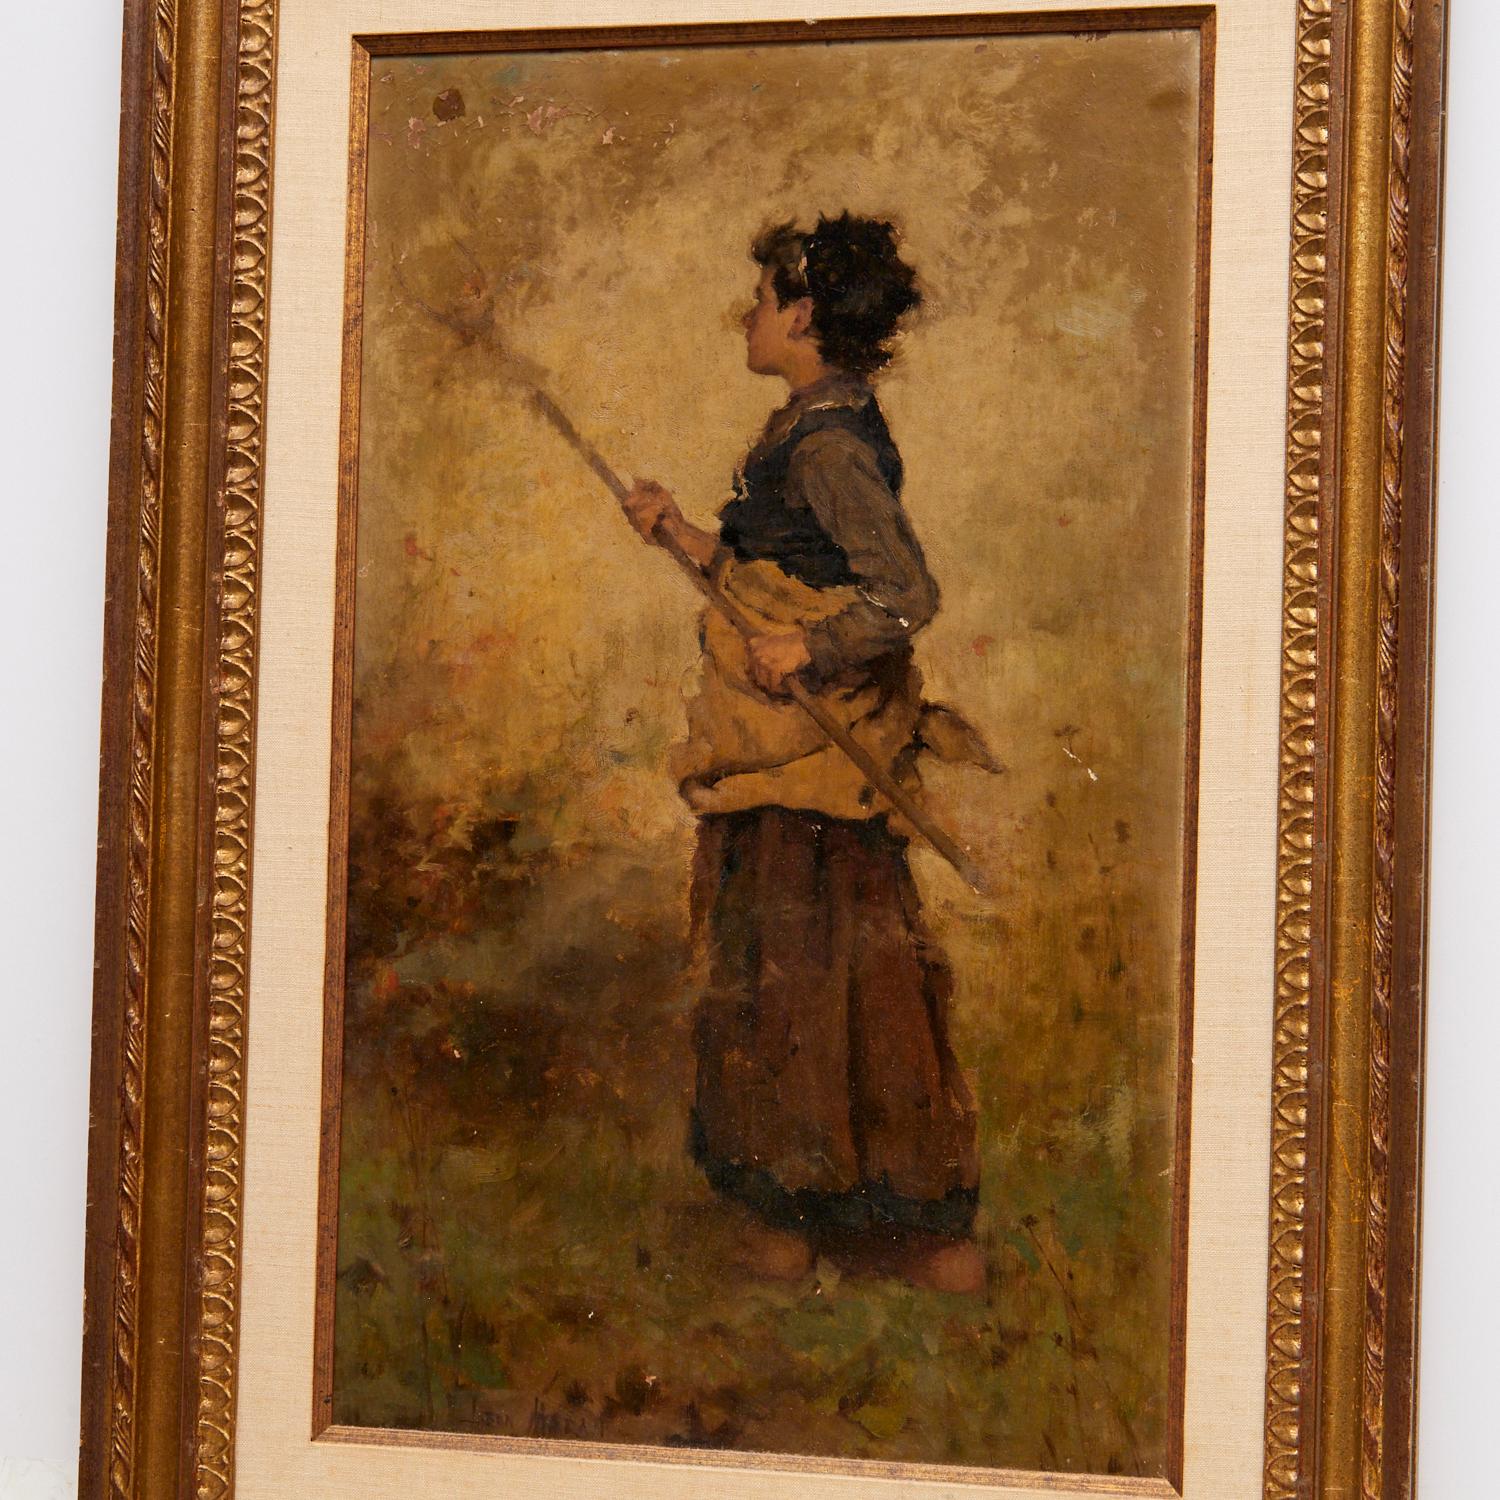 John Leon Moran (American, 1864-1941), Woman Making Hay, oil on board, signed lower center. This is a charming and evocative painting of a bygone era. The woman, dressed in working clothes and barefoot, is holding a pitchfork. The figure of the